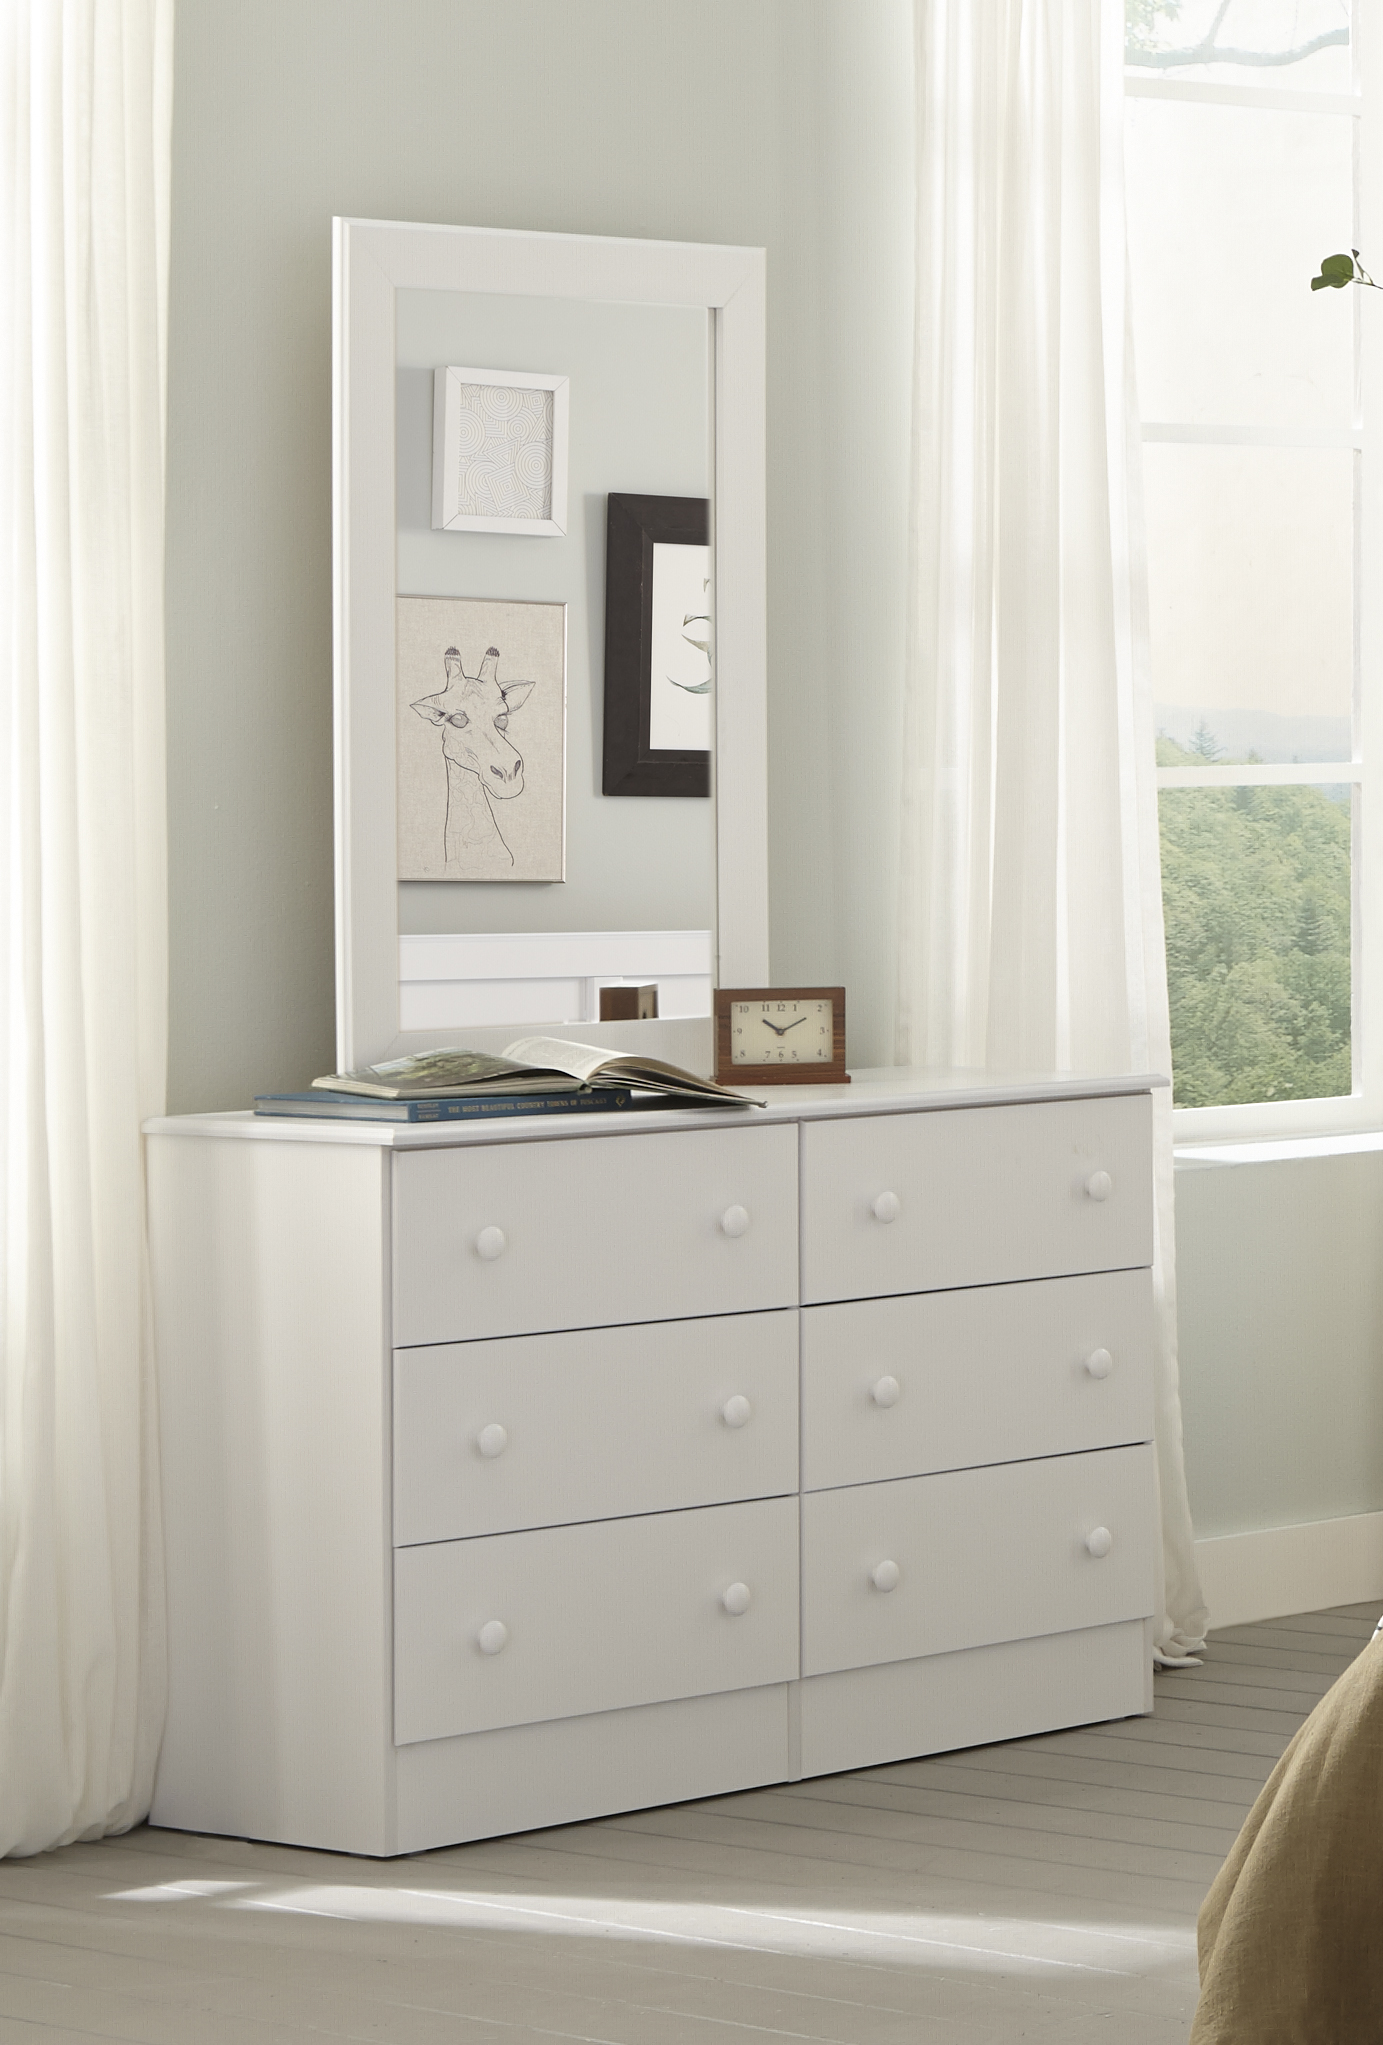 American Furniture Classics Classic White Collection 193K5T Five Piece White Bedroom set including Twin Headboard, Five Drawer Chest, Six Drawer Dresser, Mirror, and Night Stand. - image 3 of 8